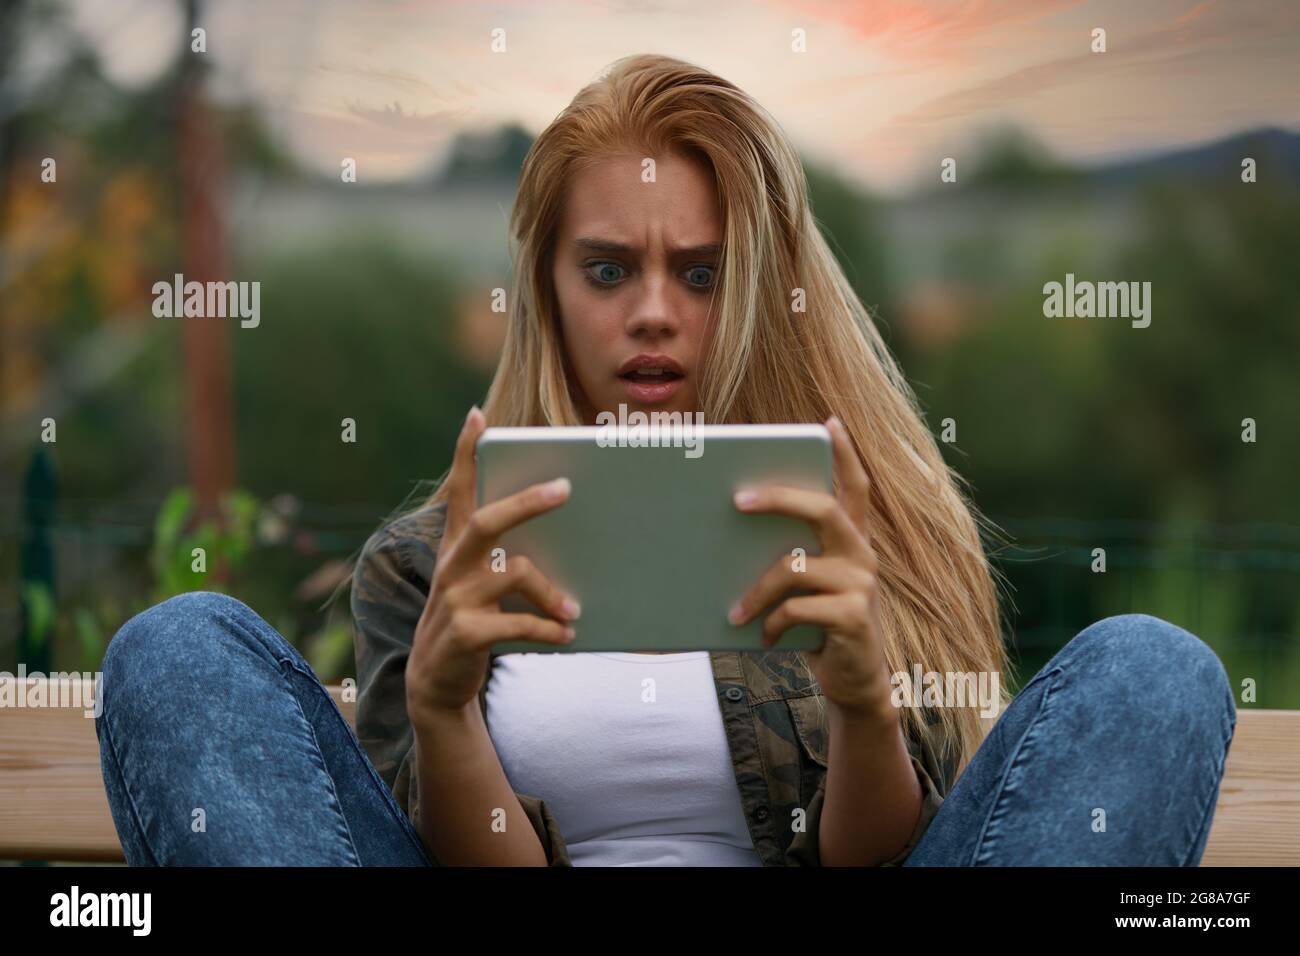 Horrified young woman staring wide-eyed at her tablet with mouth open and a flabbergasted expression as she sits with knees up on an outdoor bench Stock Photo